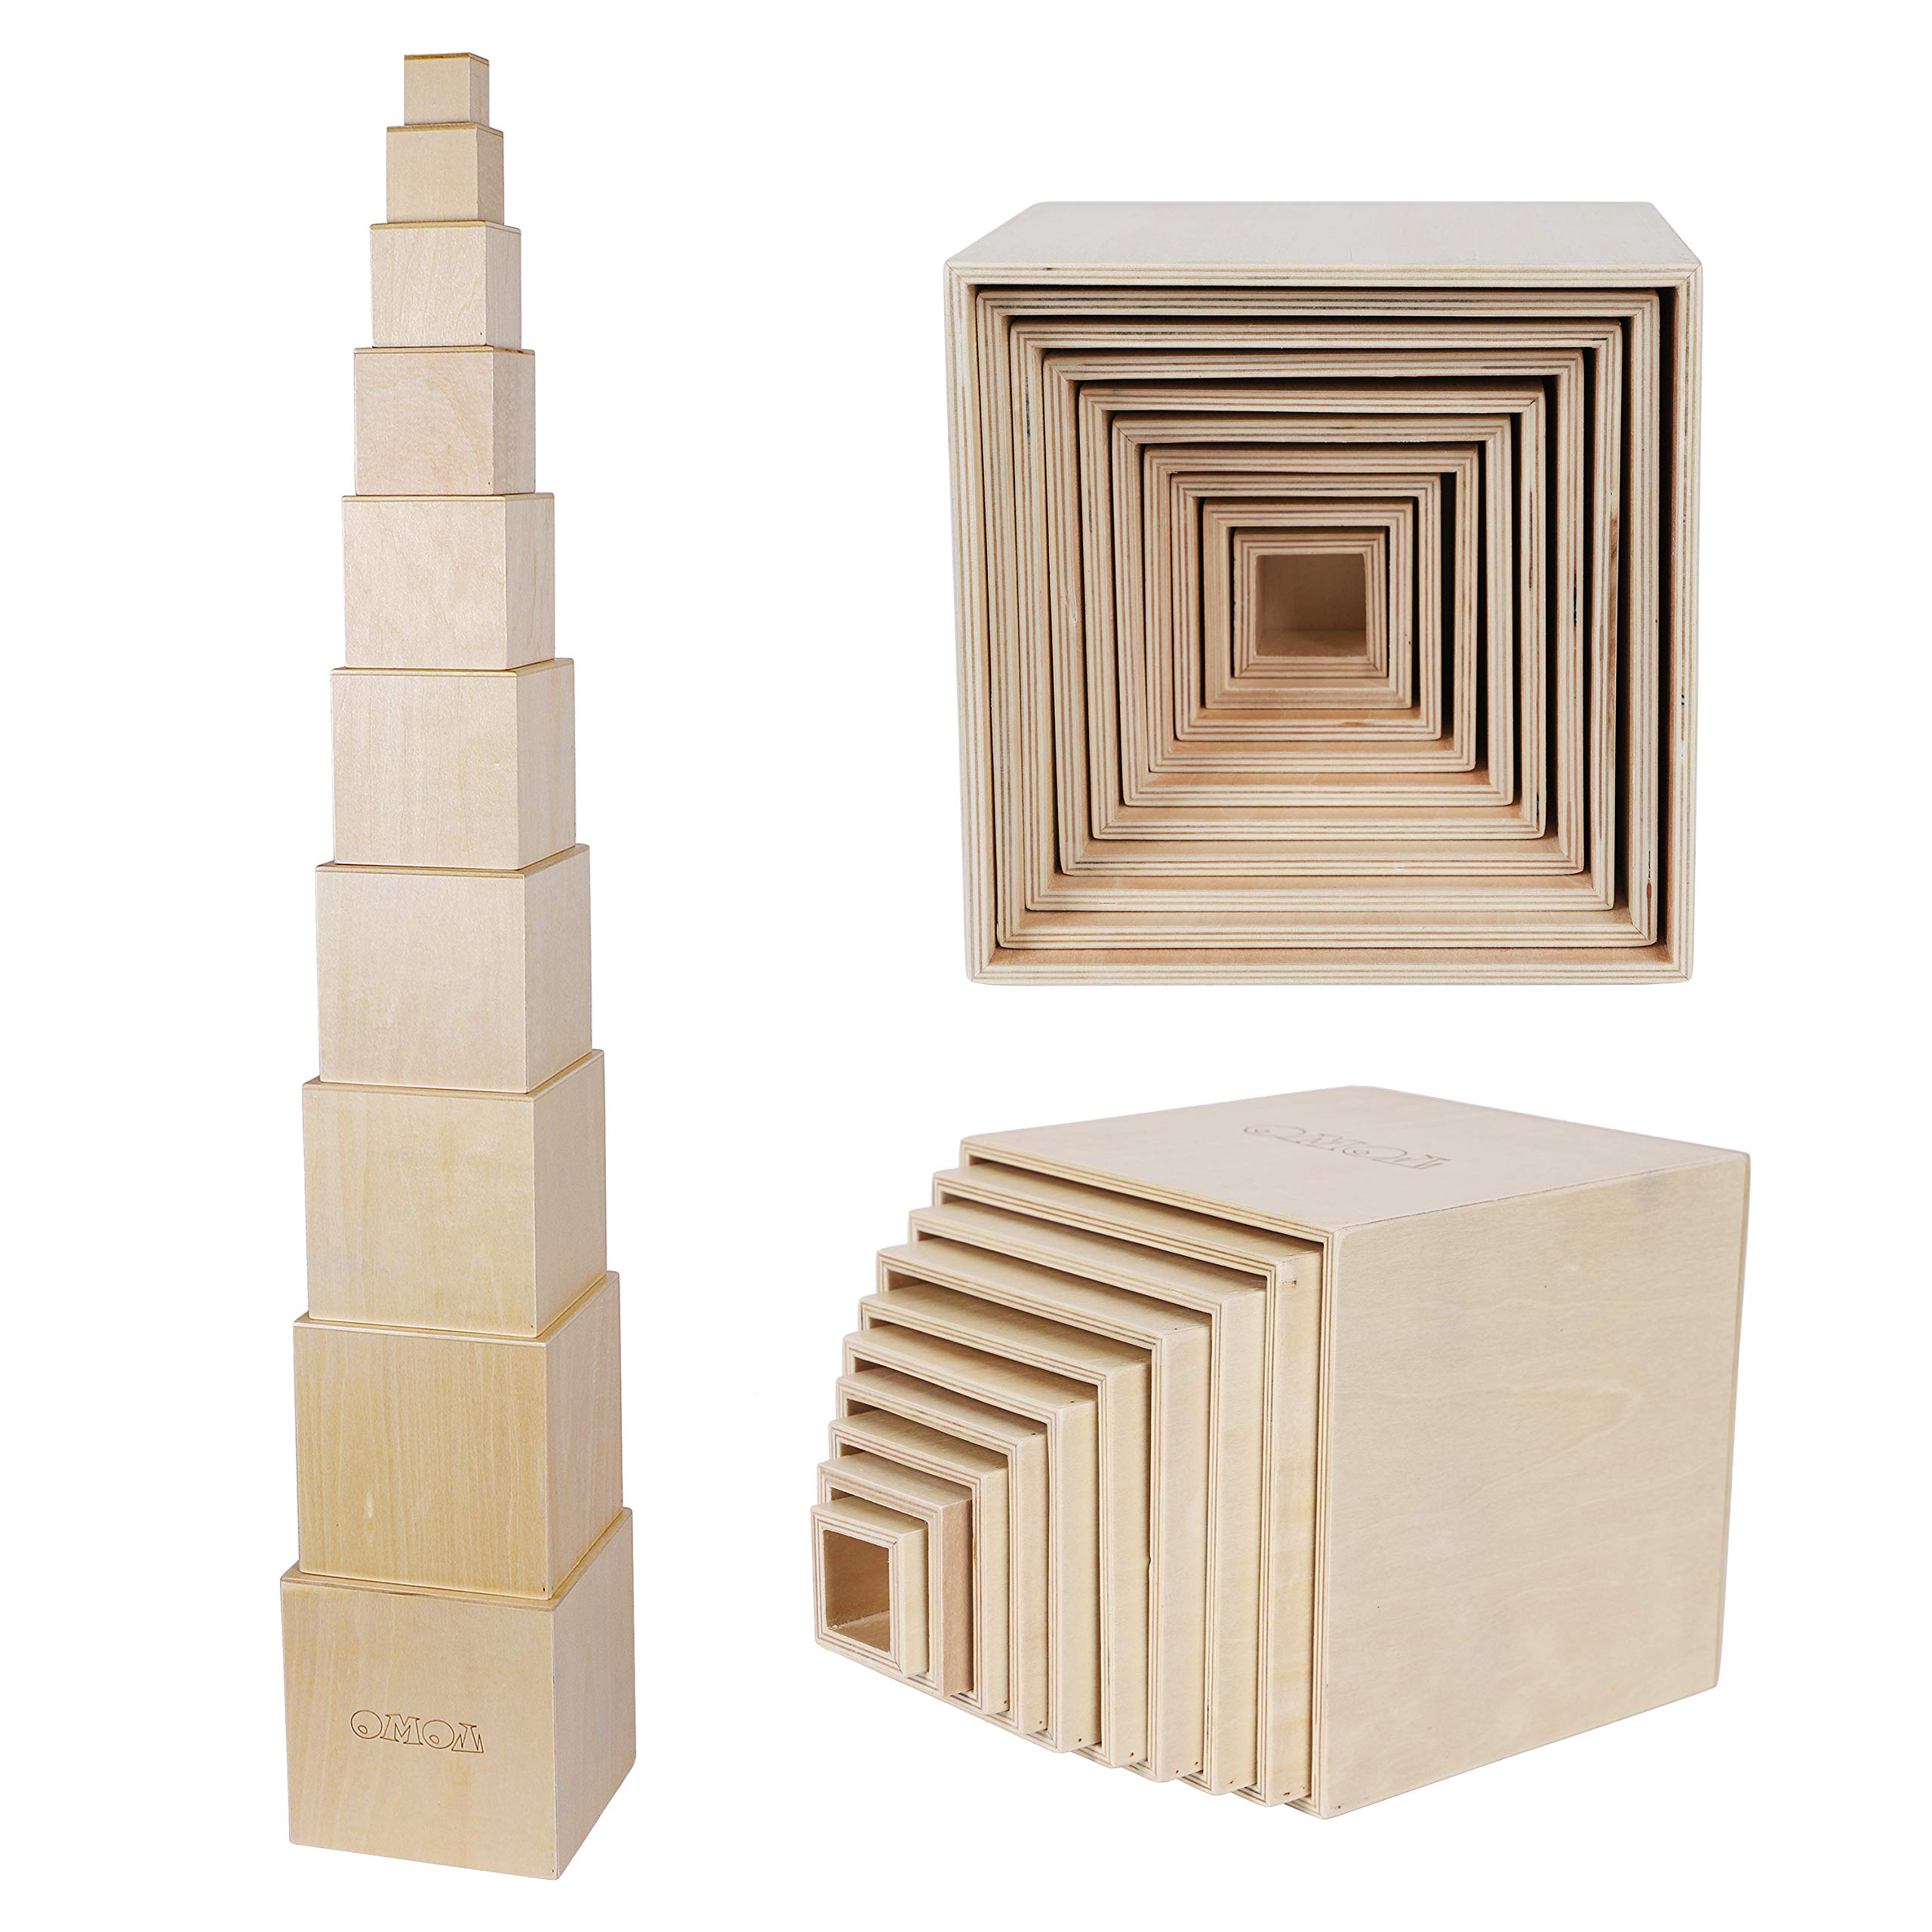 TOWO Wooden Stacking Boxes-Nesting and Sorting Cups Blocks for Toddlers-Stacking Cubes Educational Learning Toys for 2 Years Old Montessori Materials